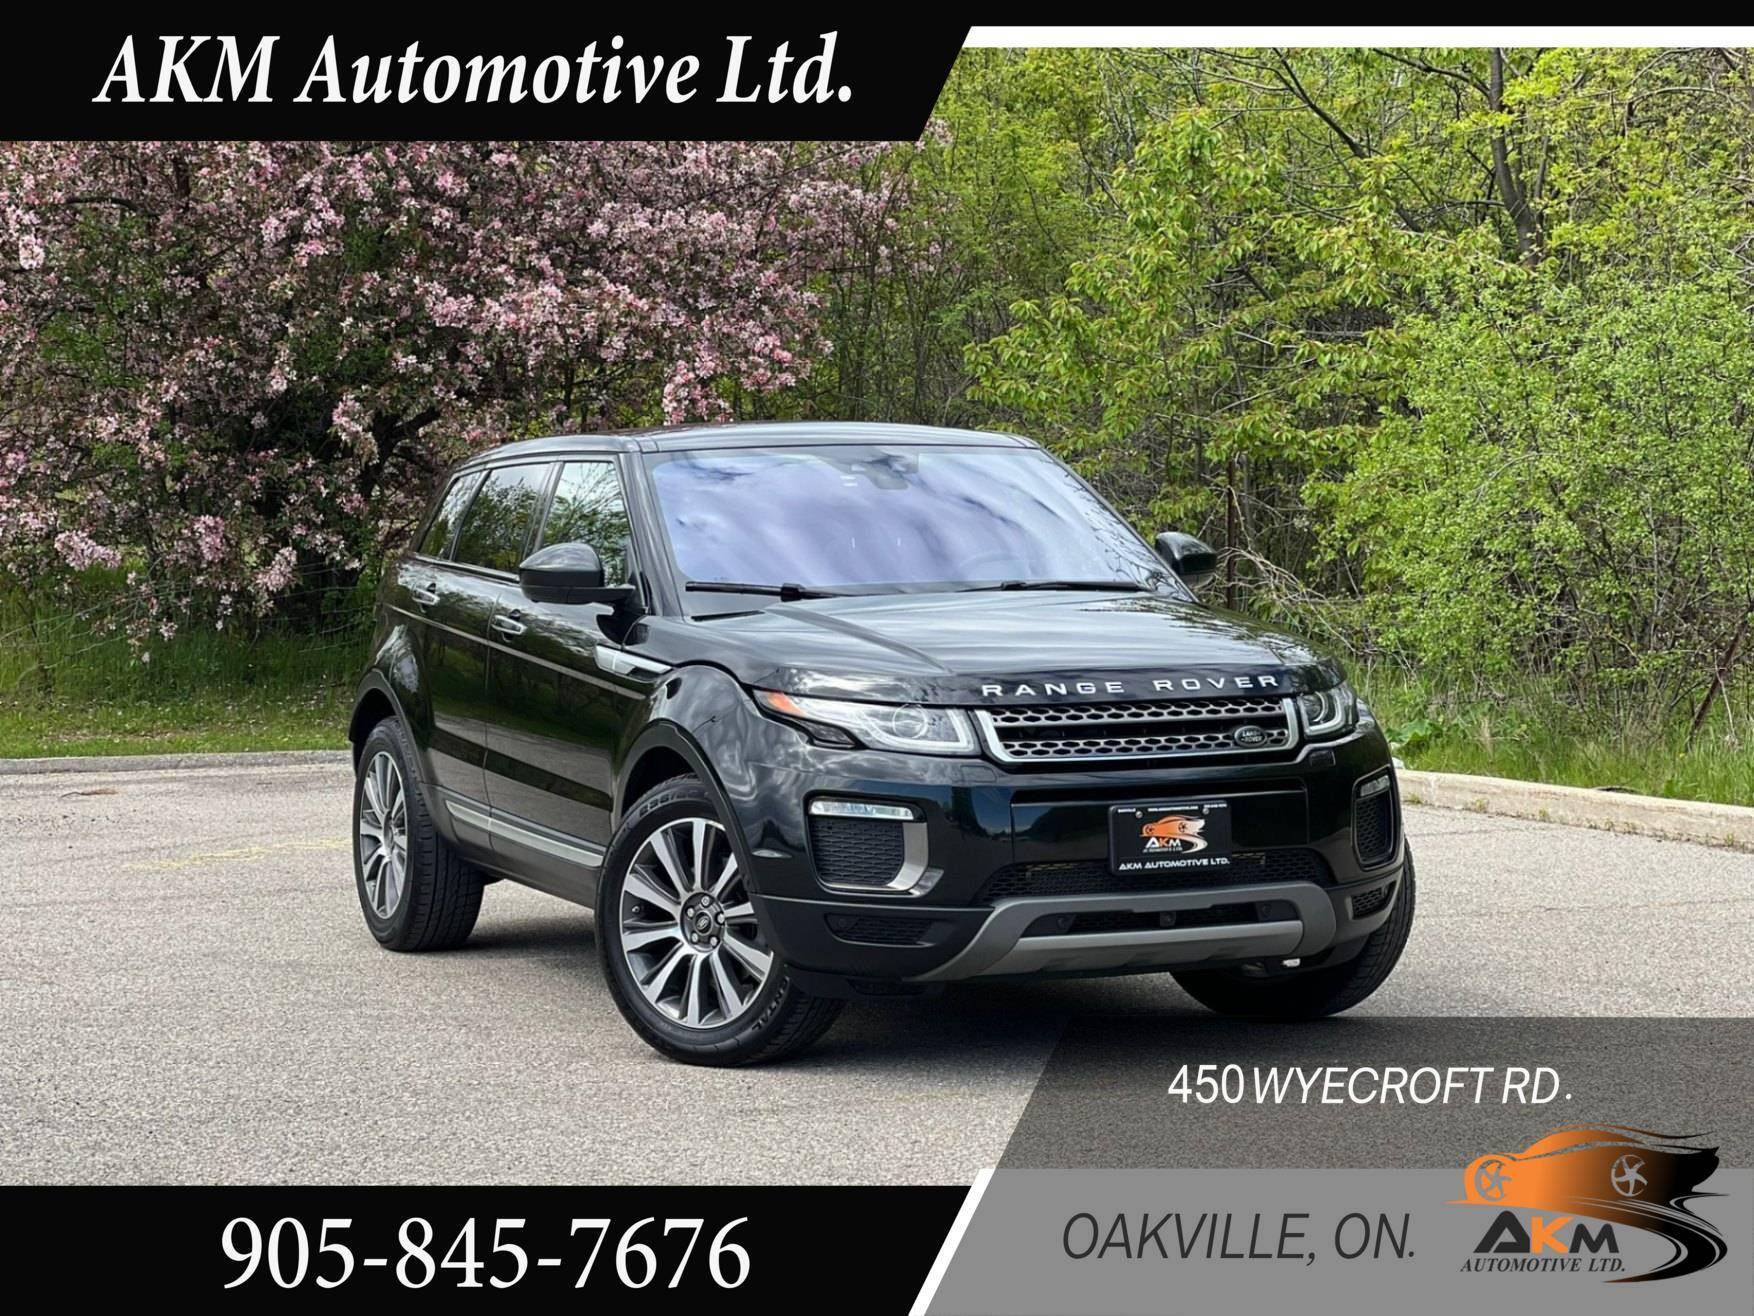 2017 Land Rover Range Rover Evoque 5dr HB HSE, Accident Free, Certified